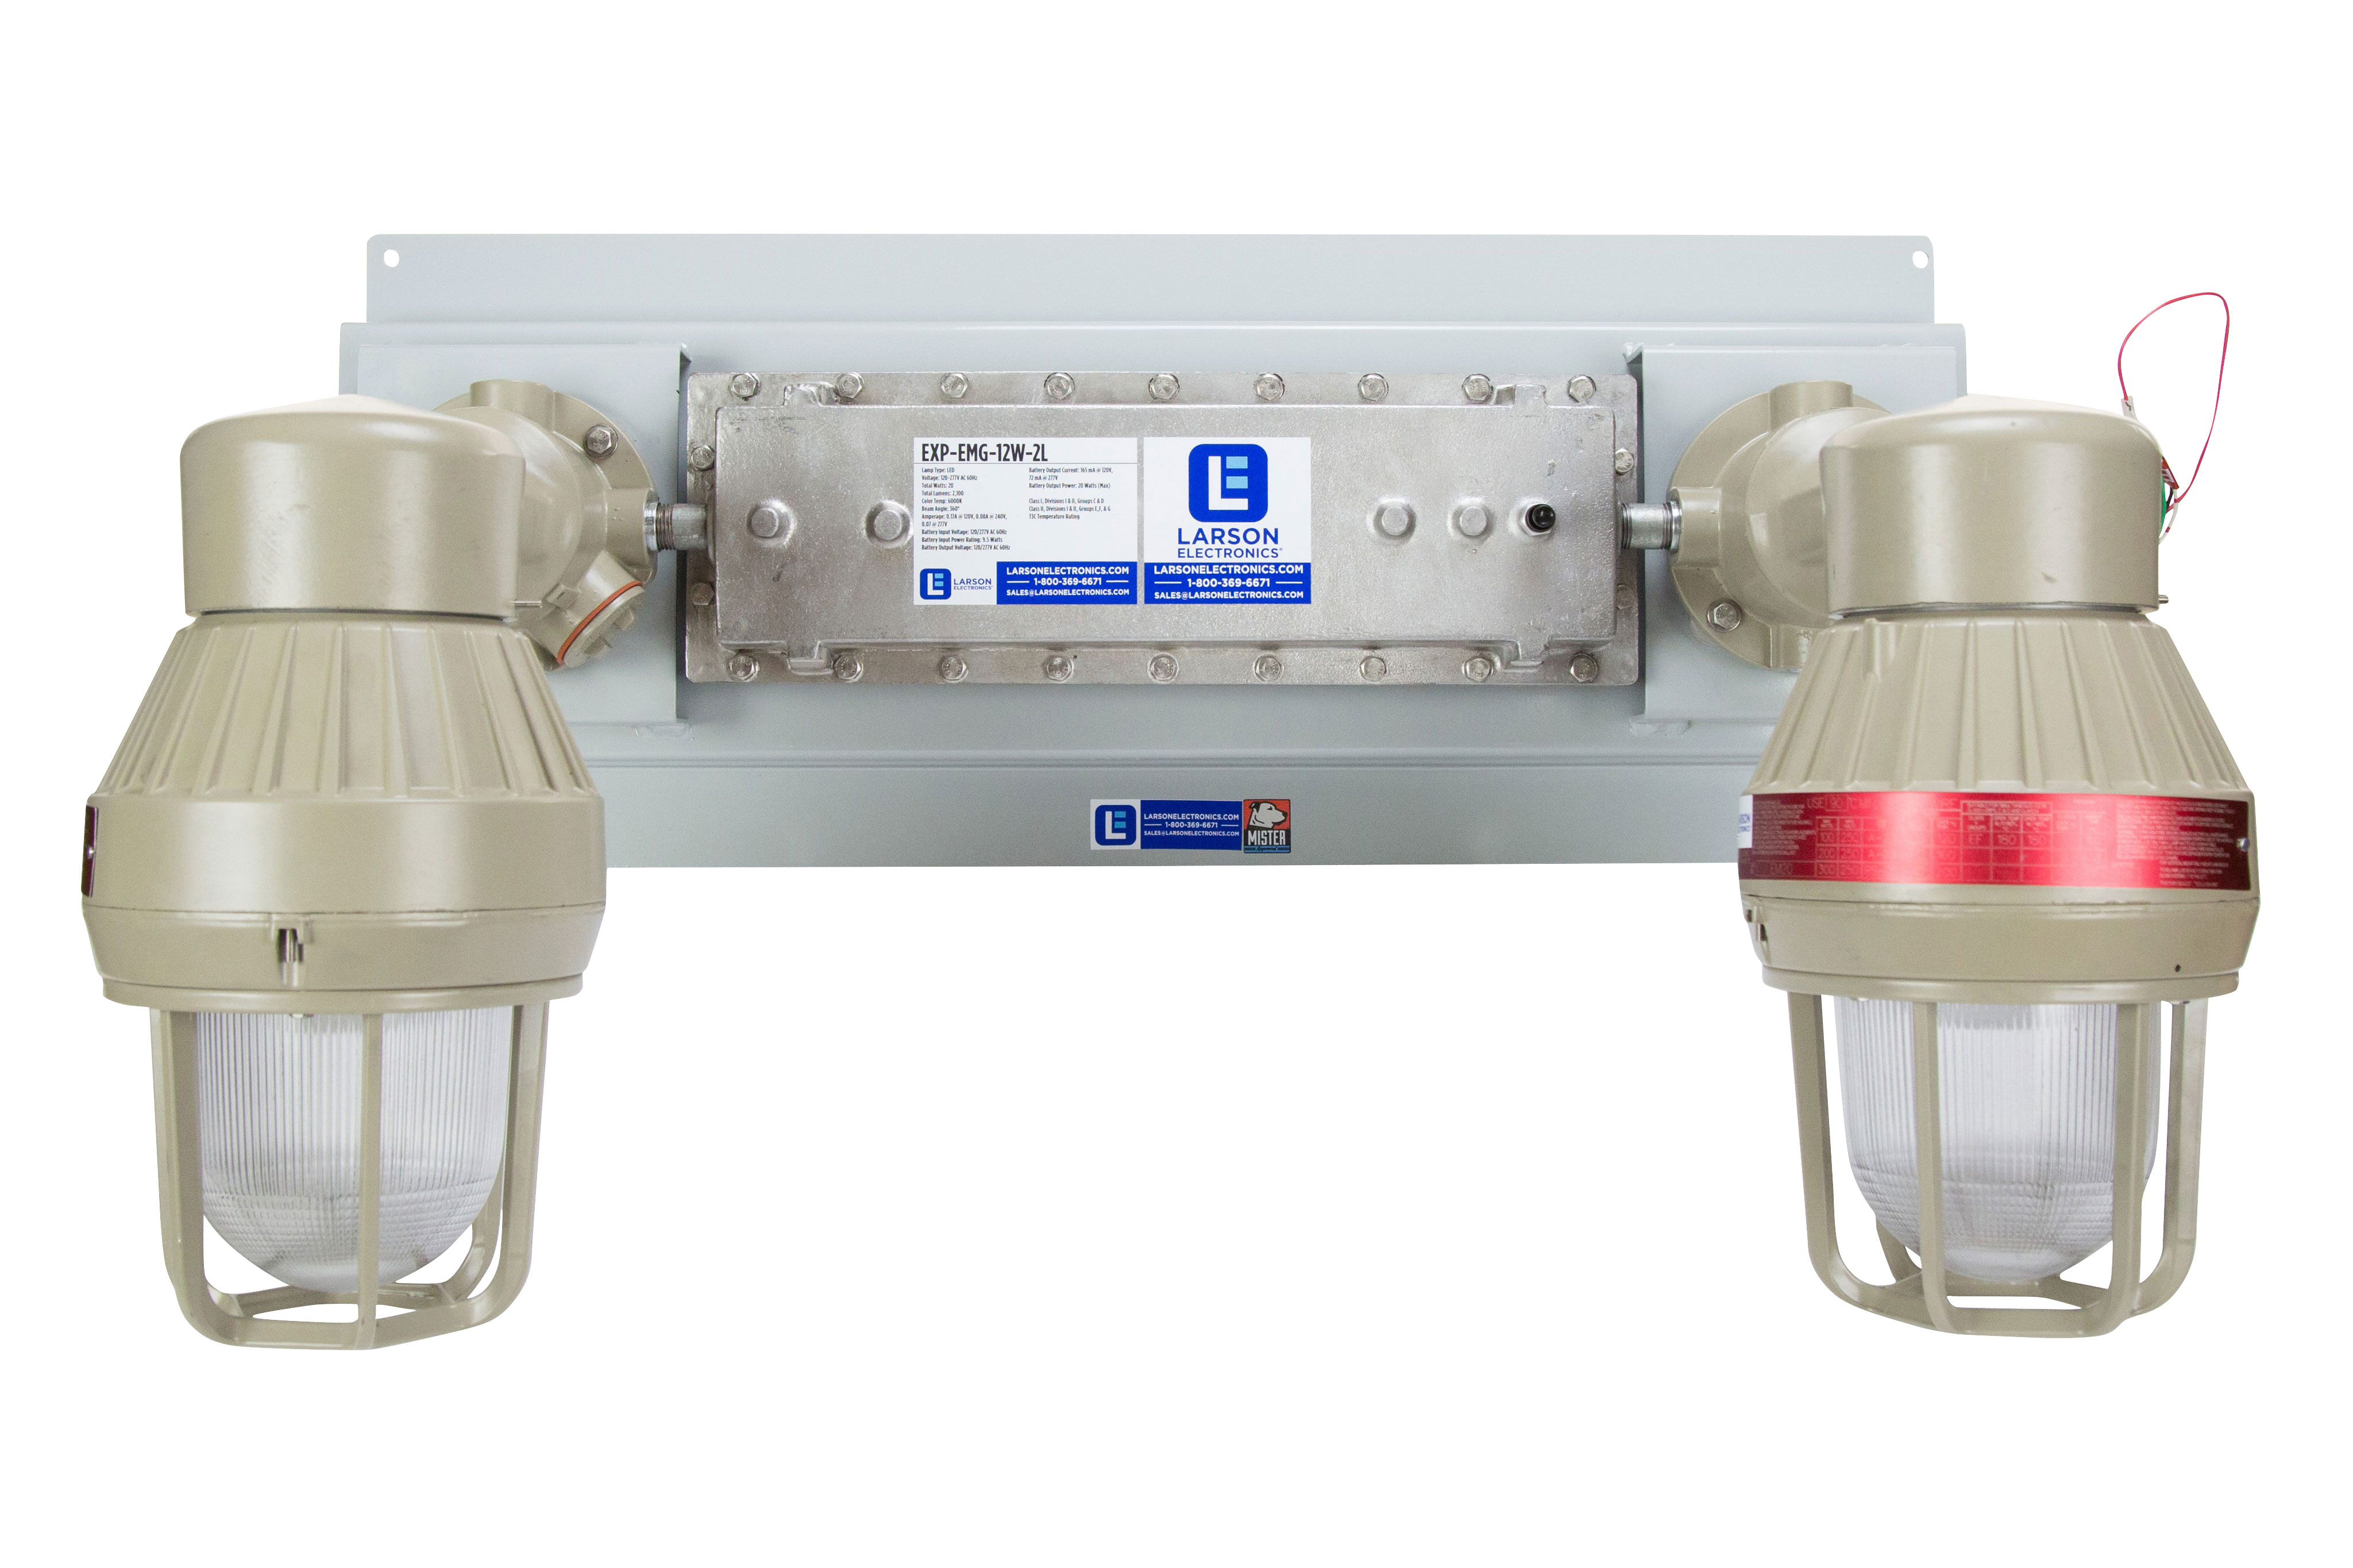 50 Watt Emergency LED Lighting System with 90 minute runtime